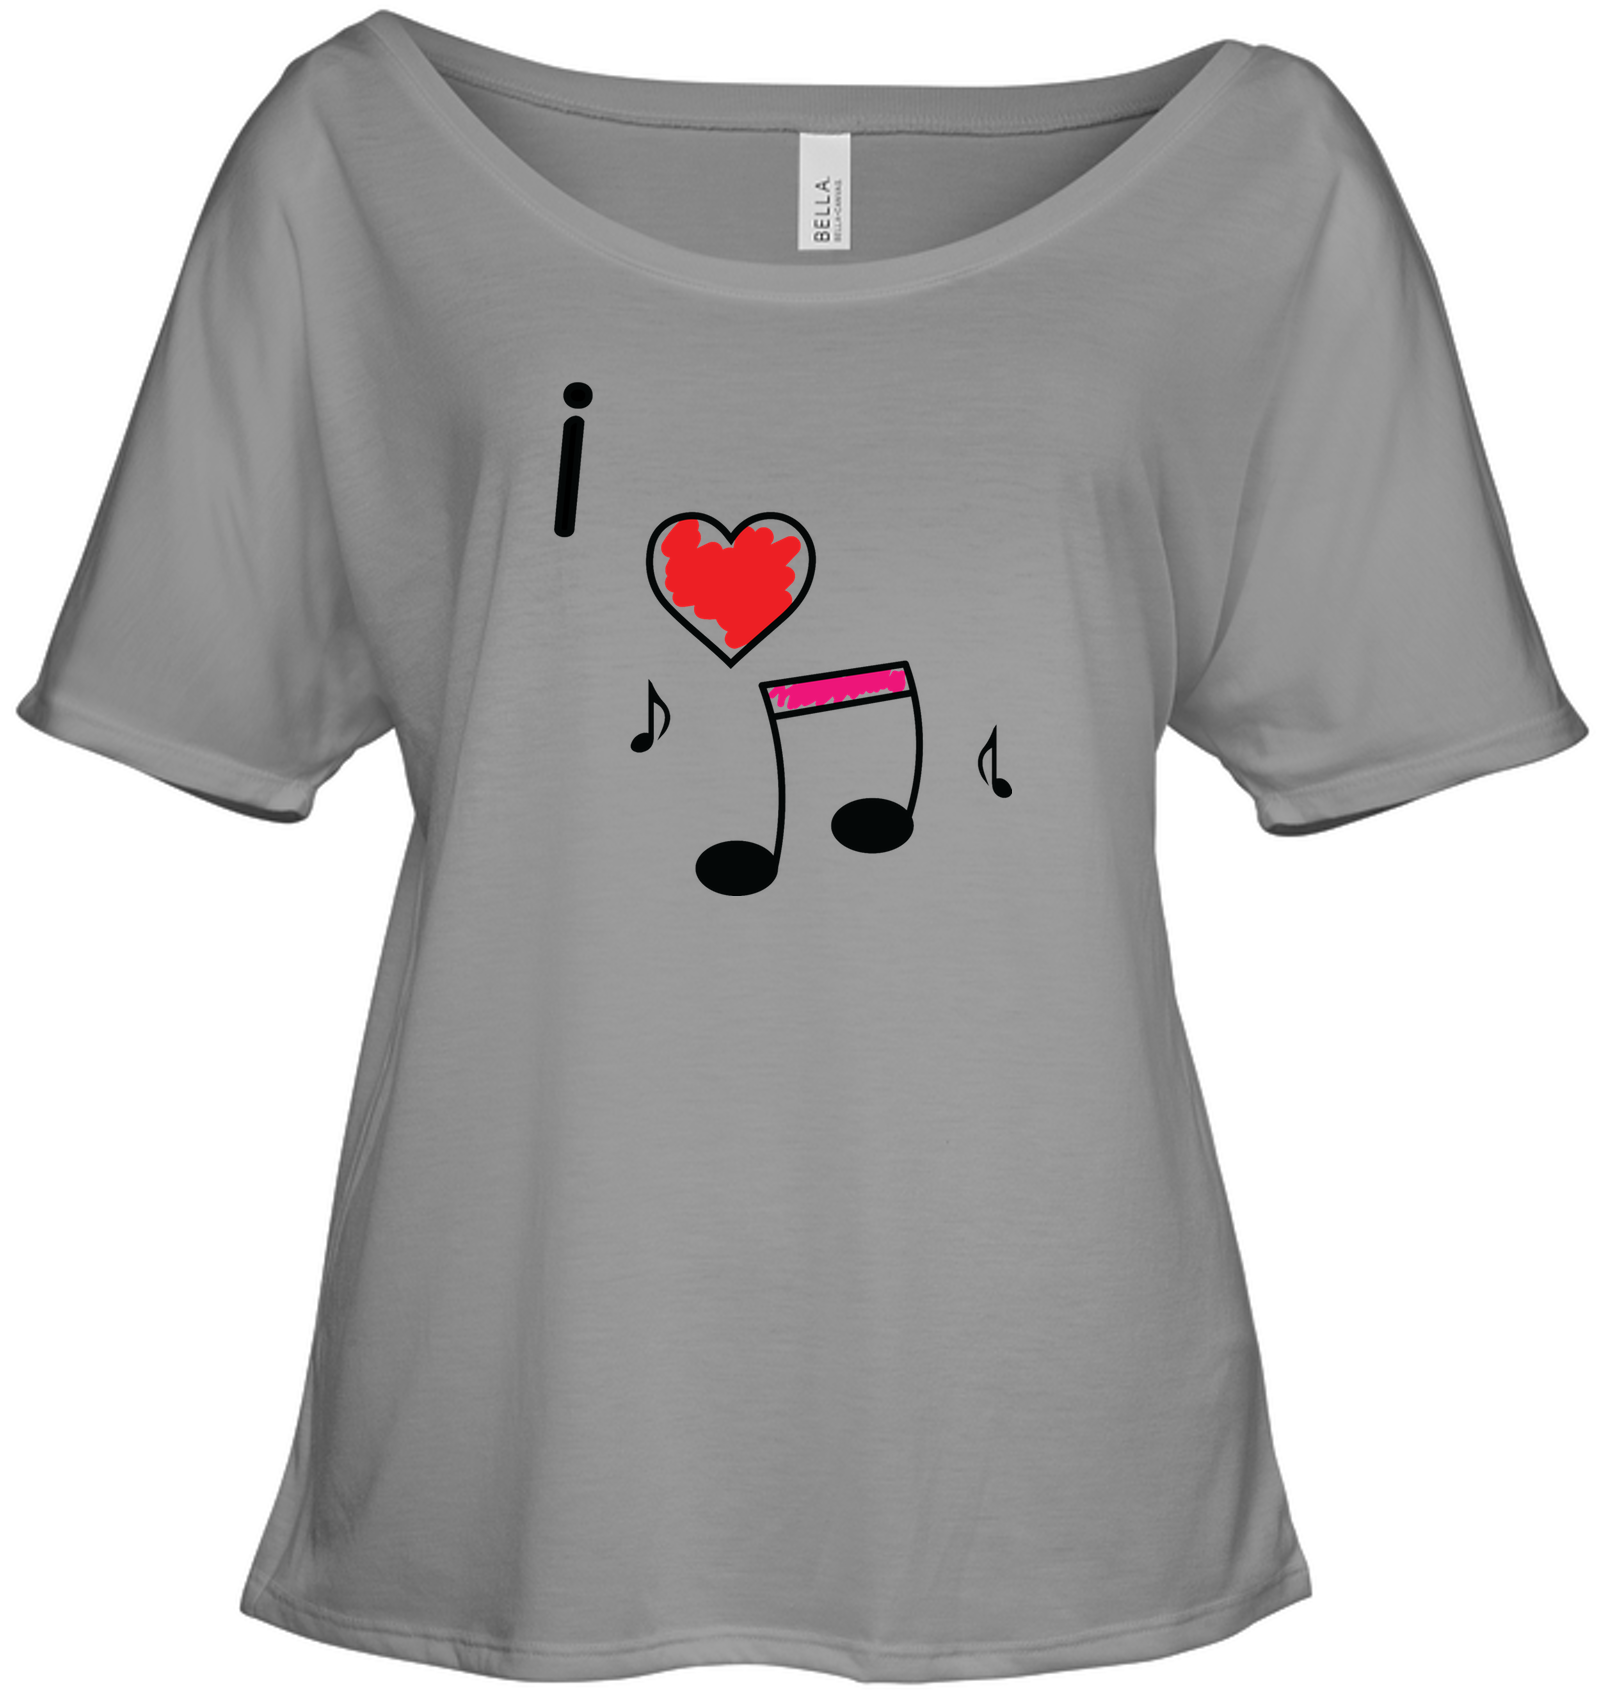 I Love Music Hearts and Fun - Bella + Canvas Women's Slouchy Tee